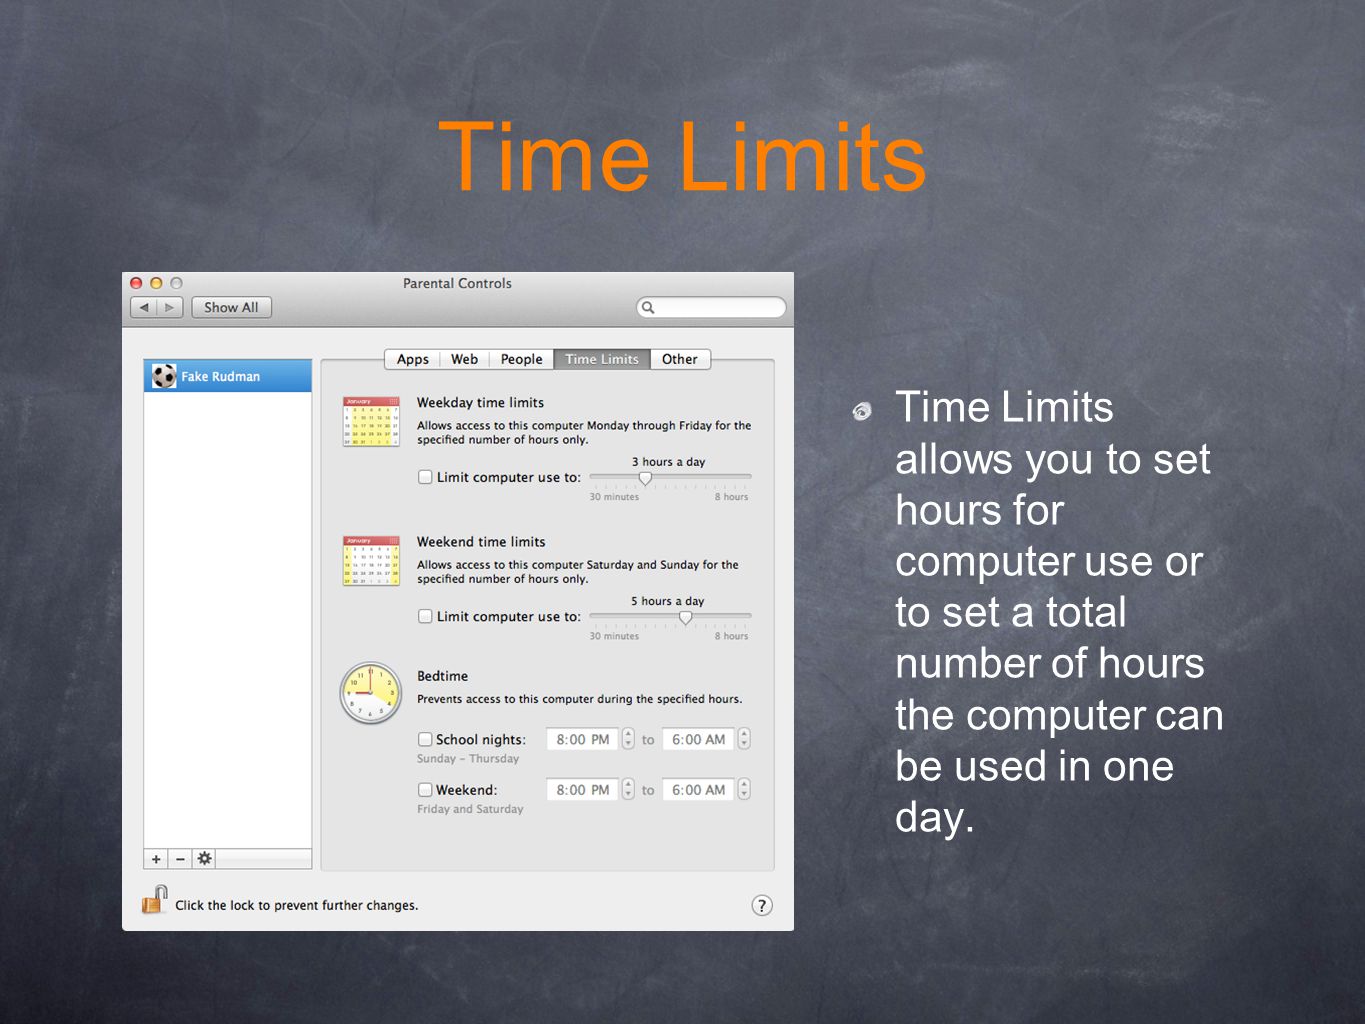 Time Limits Time Limits allows you to set hours for computer use or to set a total number of hours the computer can be used in one day.